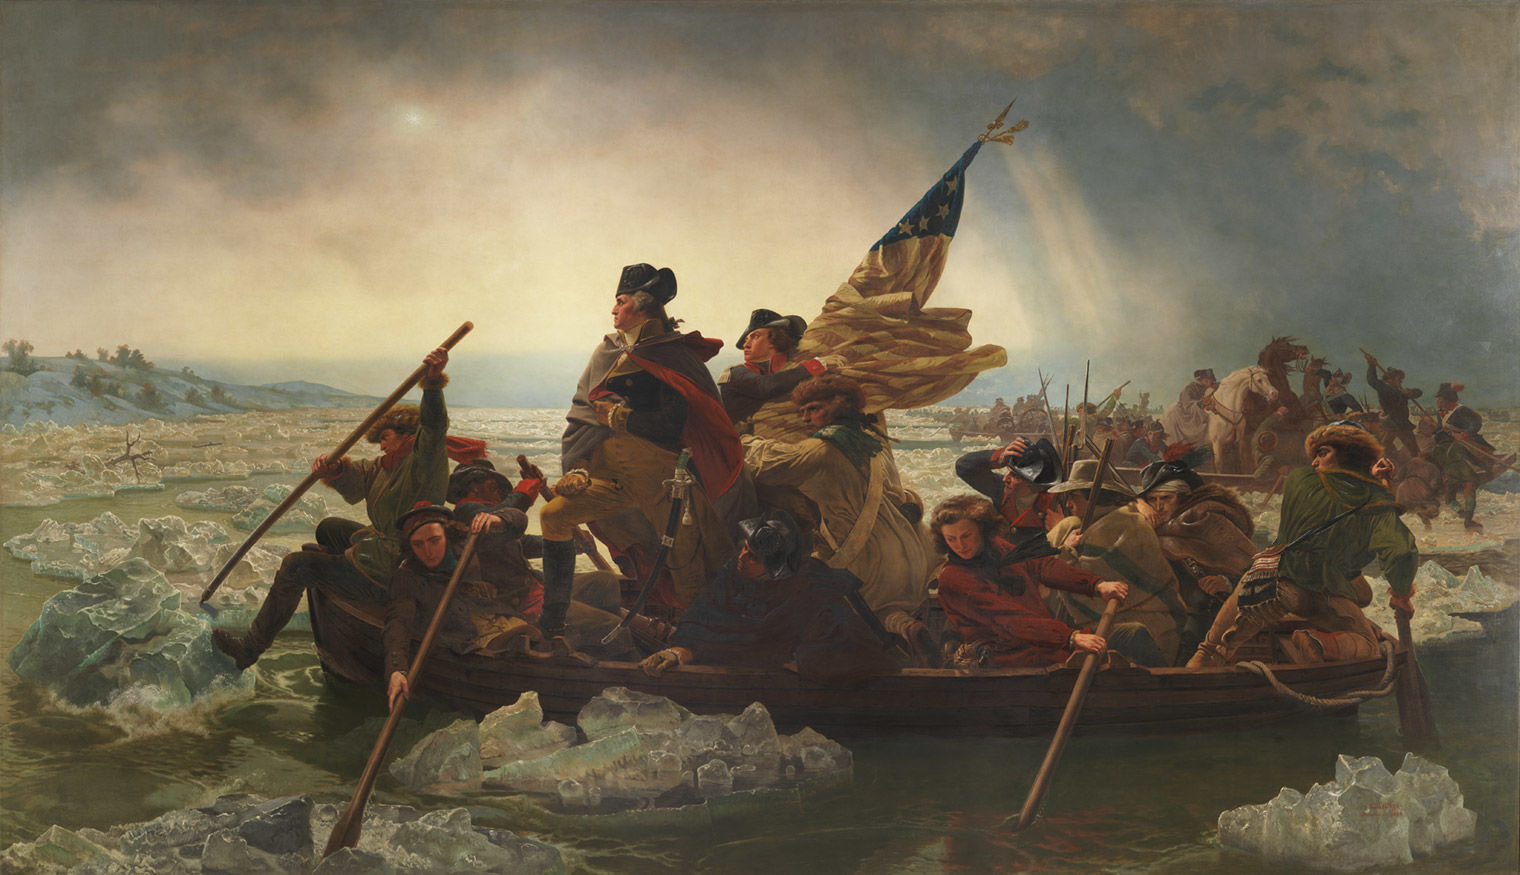 A painting depicting a scene from the American Revolution, with George Washington standing in the bow of a boat being rowed across a wide river